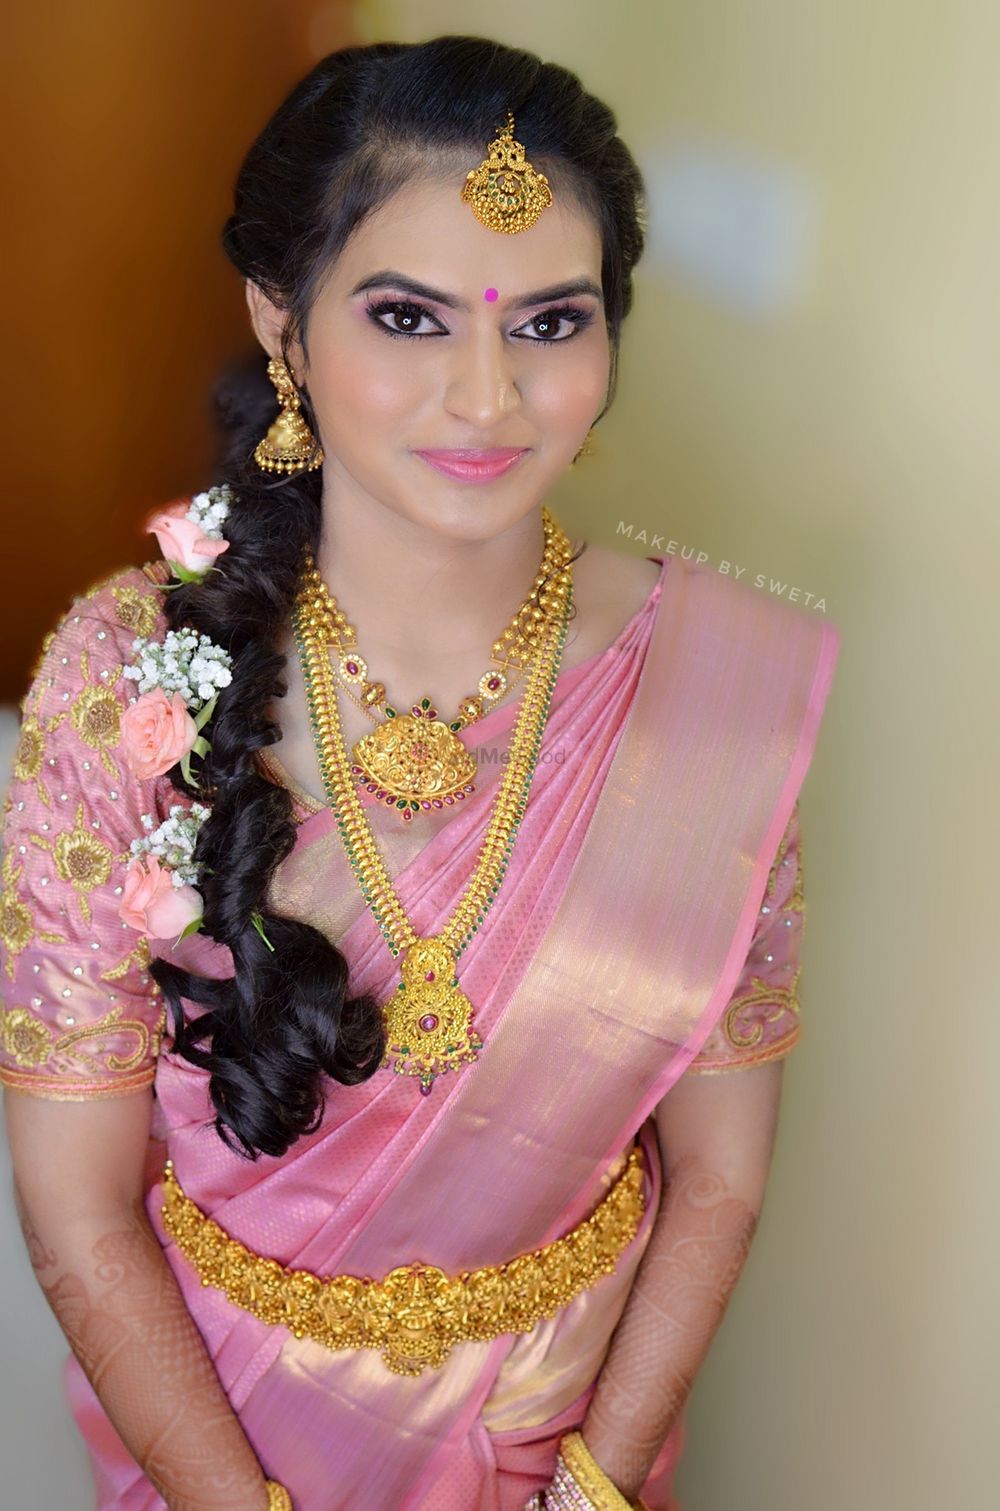 Photo From Thirumala - By Makeup by Sweta